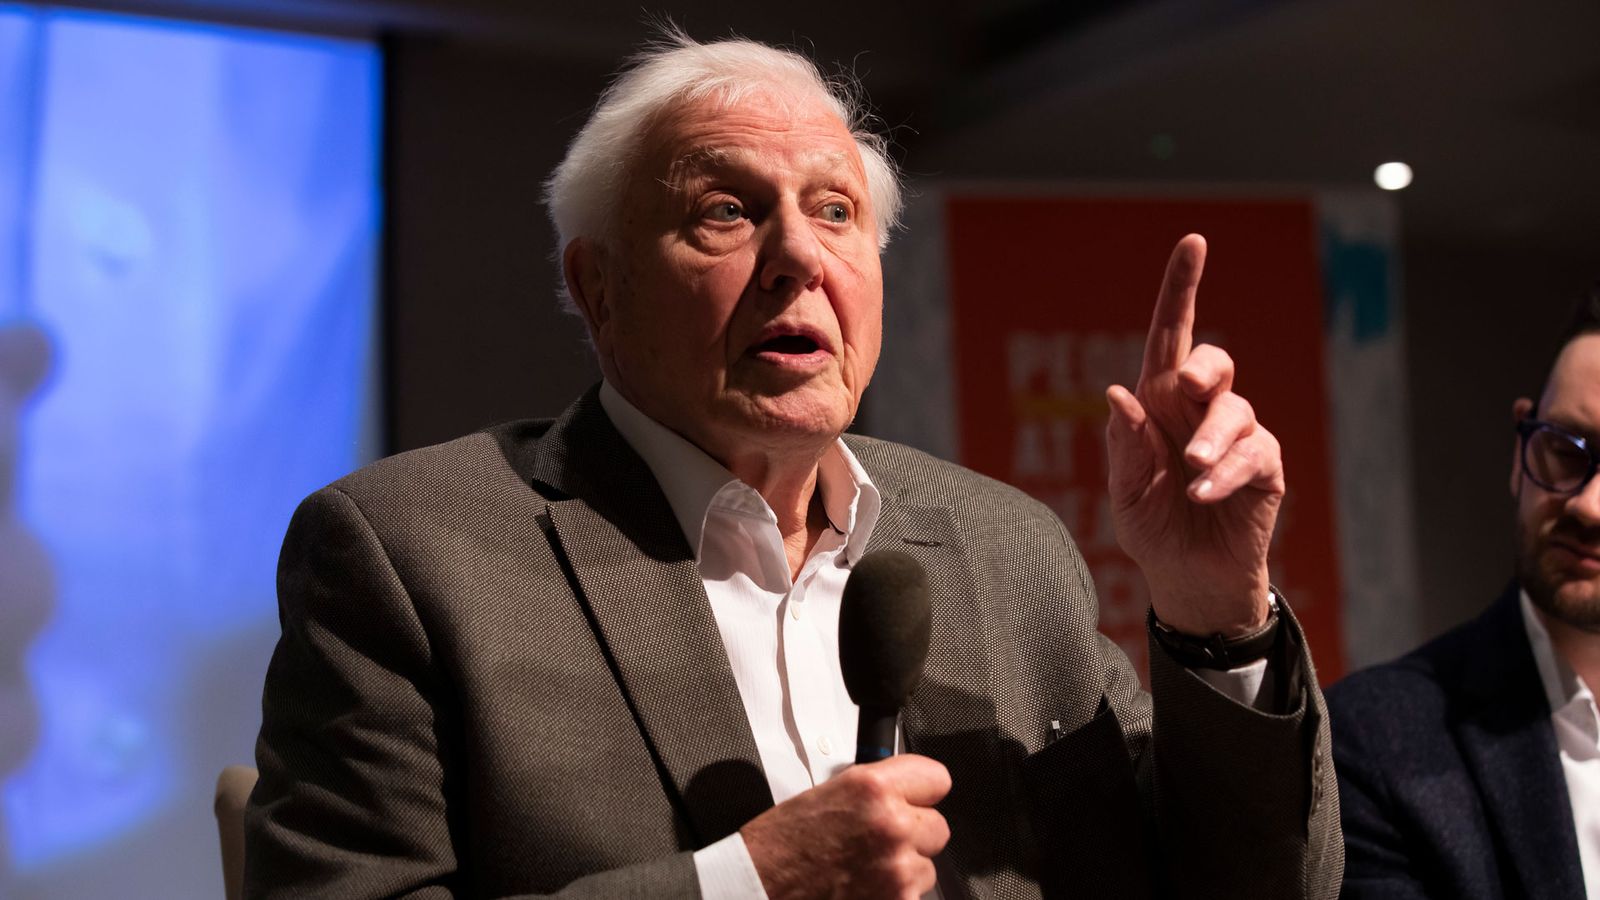 David Attenborough warns politicians 'short-sighted' on climate change - Sky News